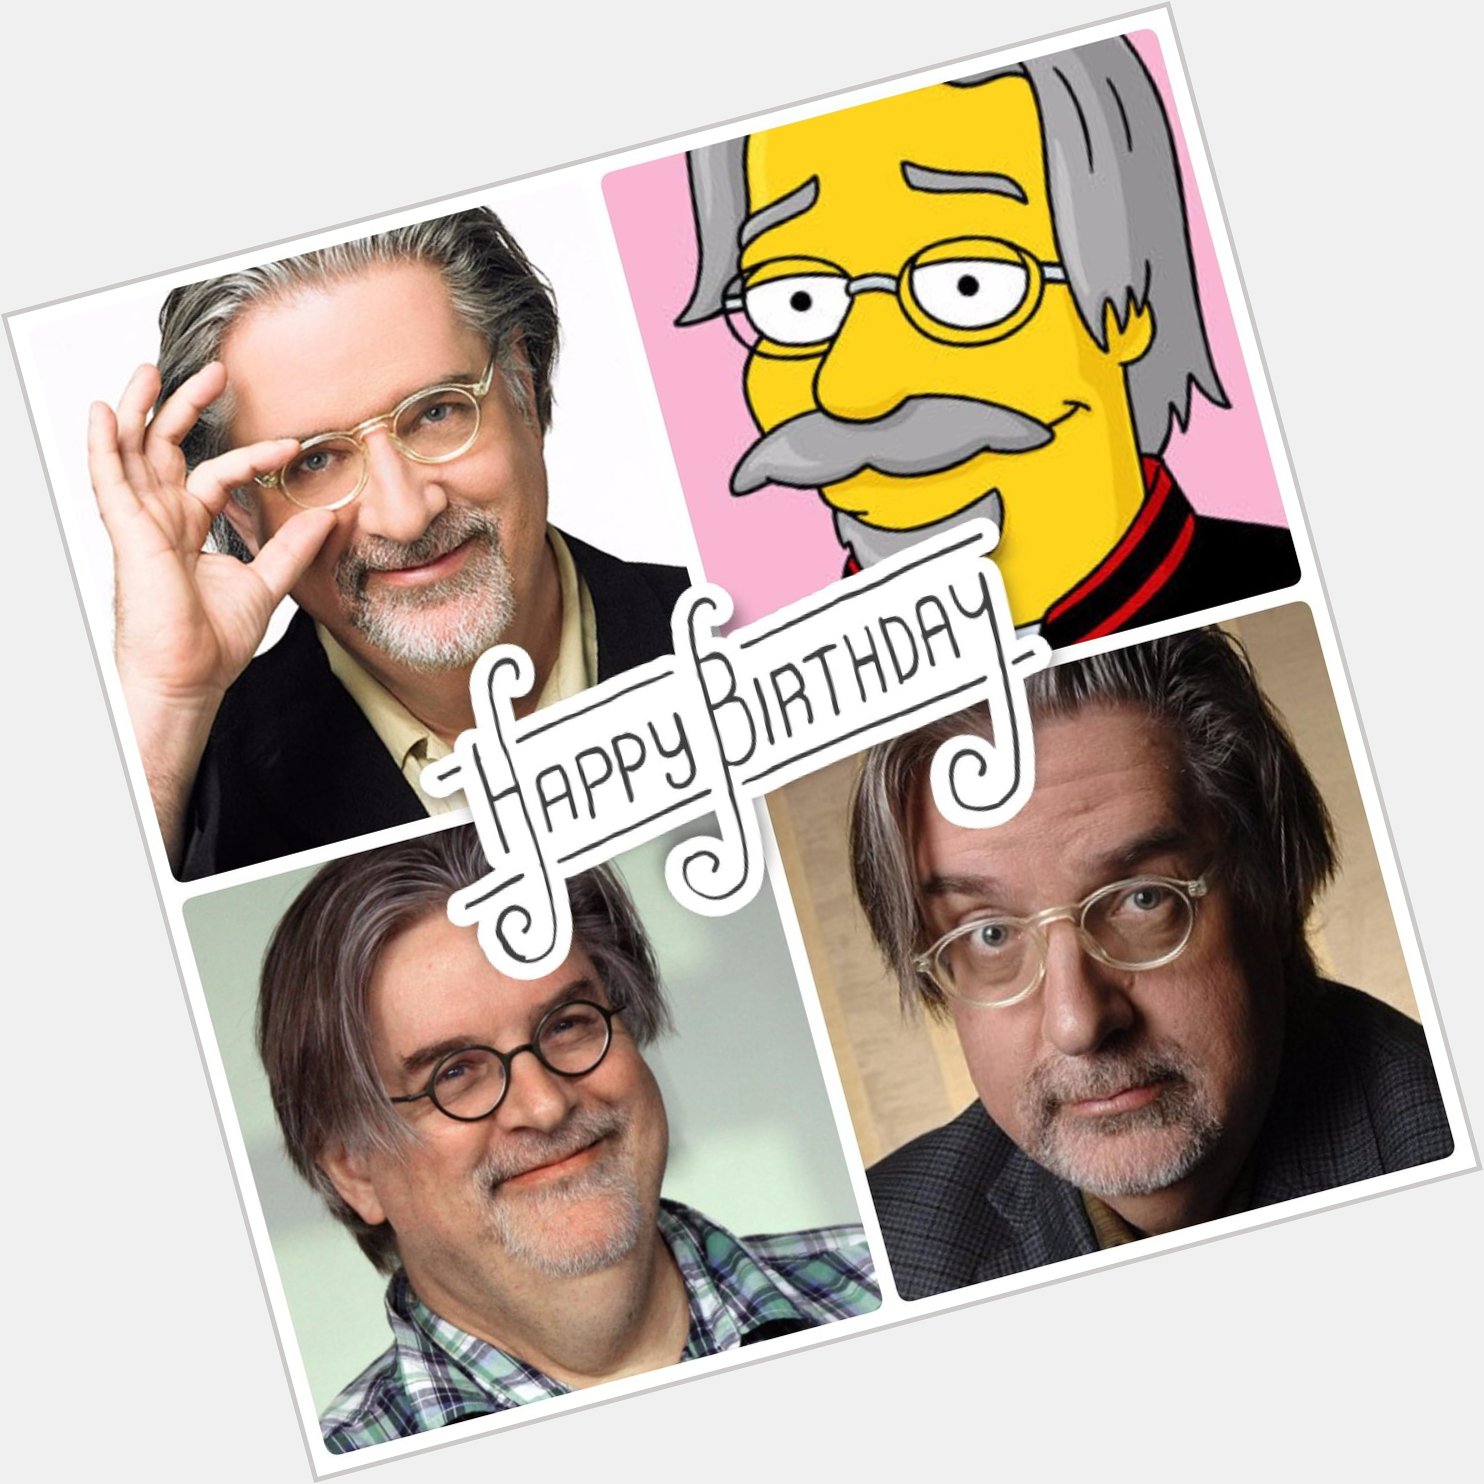 Happy Birthday, Matt Groening!! 
Where would we be without 